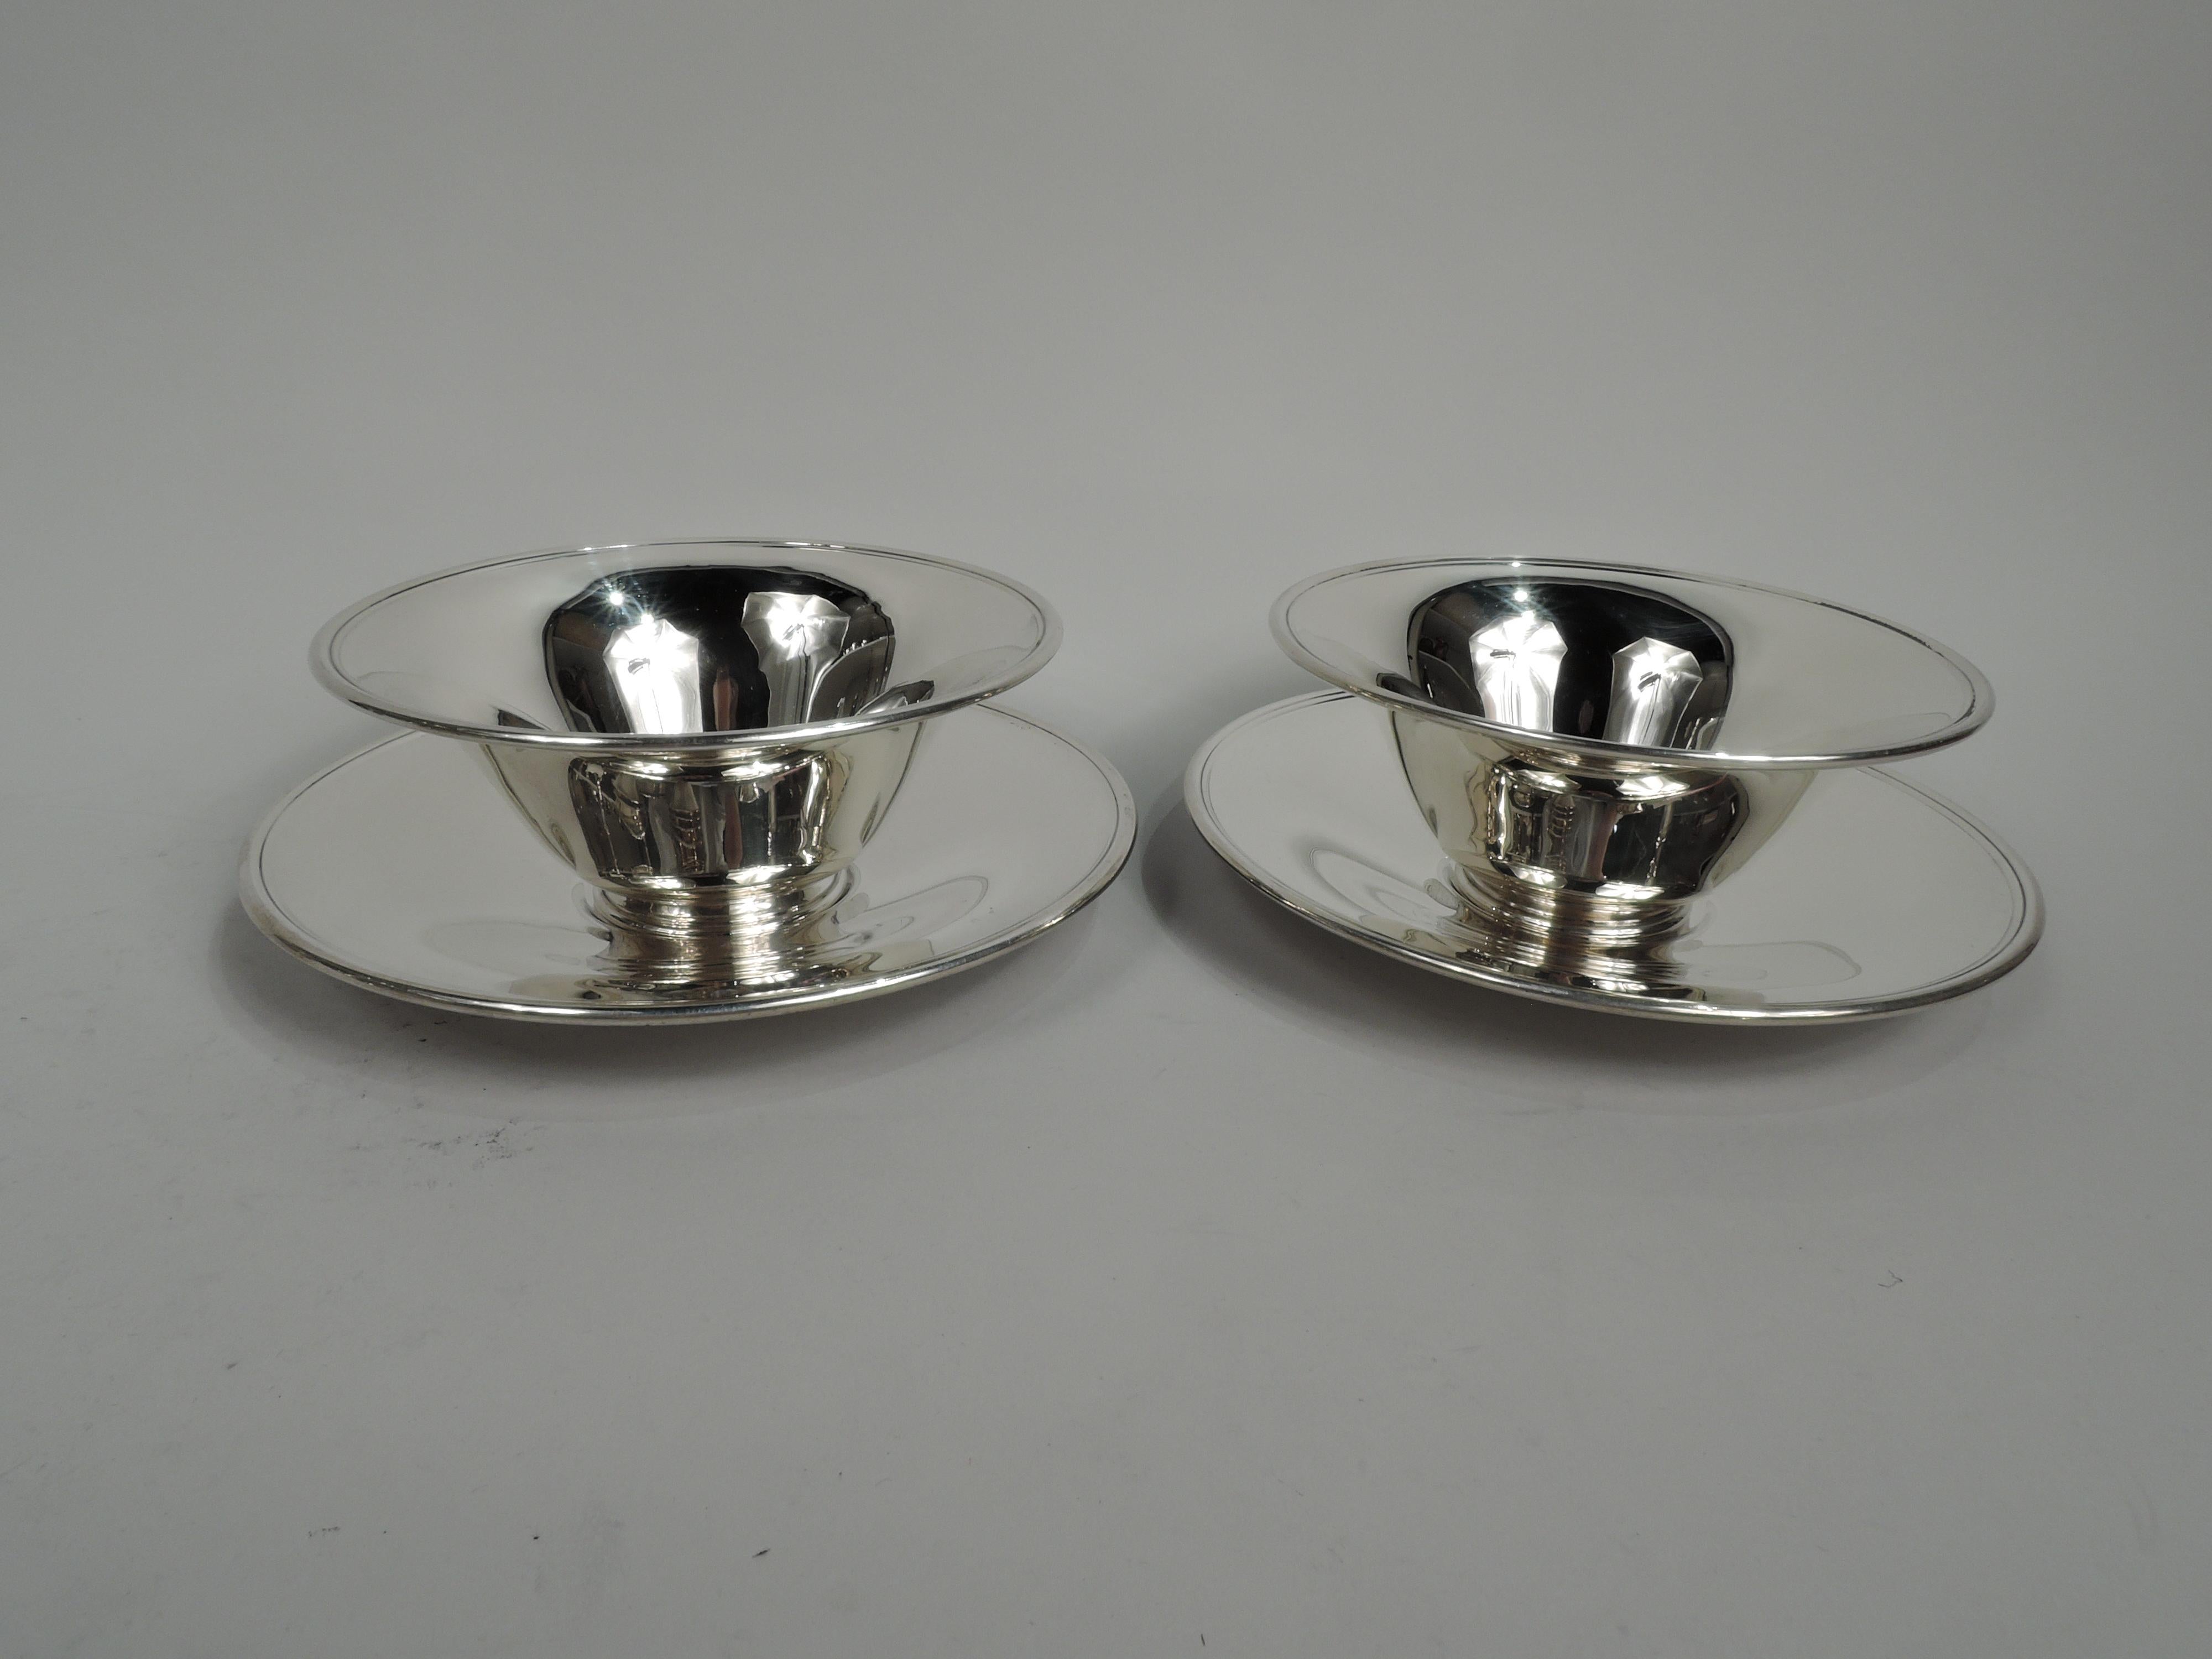 Art Deco Tiffany & Co. American Modern Dessert Set for 12 with Bowls and Plates